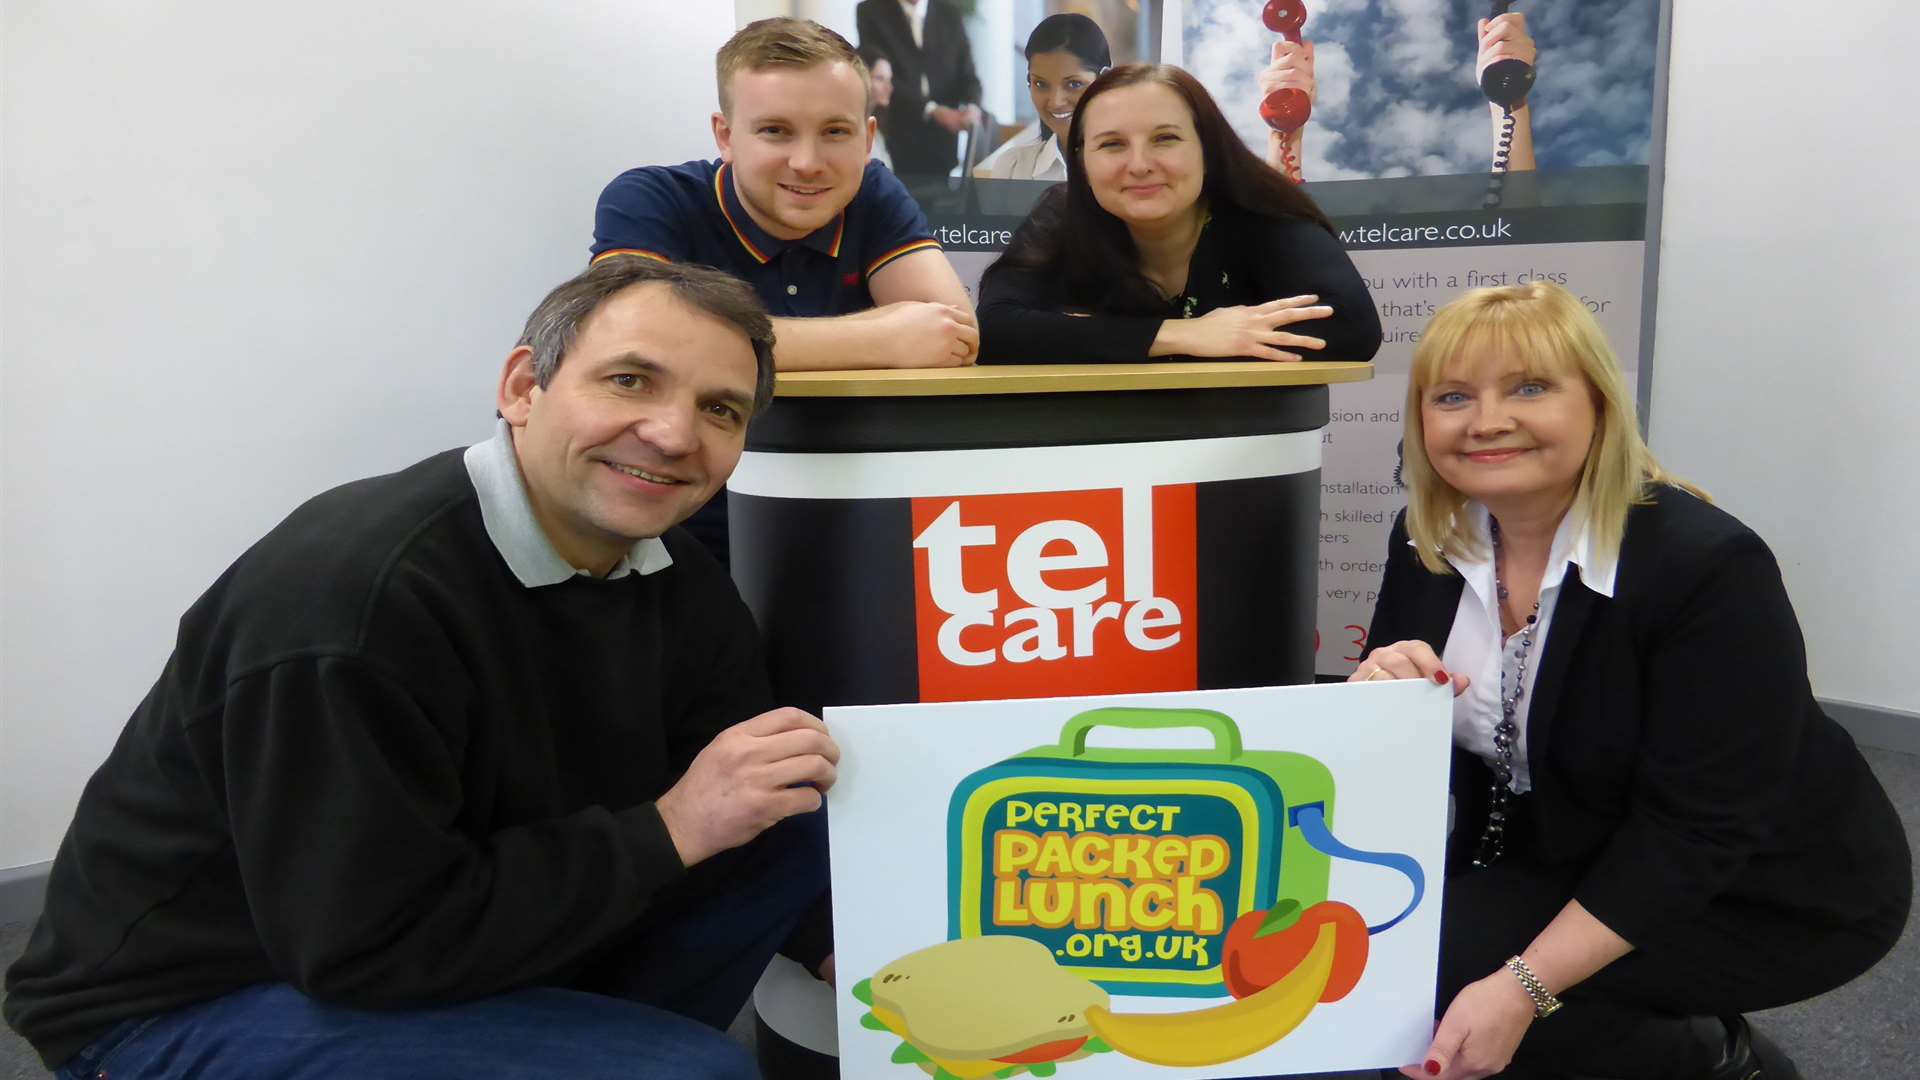 David and Lisa Settle (front) with Matt Ward and Rebecca Garcia, all of Telcare Ltd, announce company's support for the Perfect Packed Lunch Awards 2015.